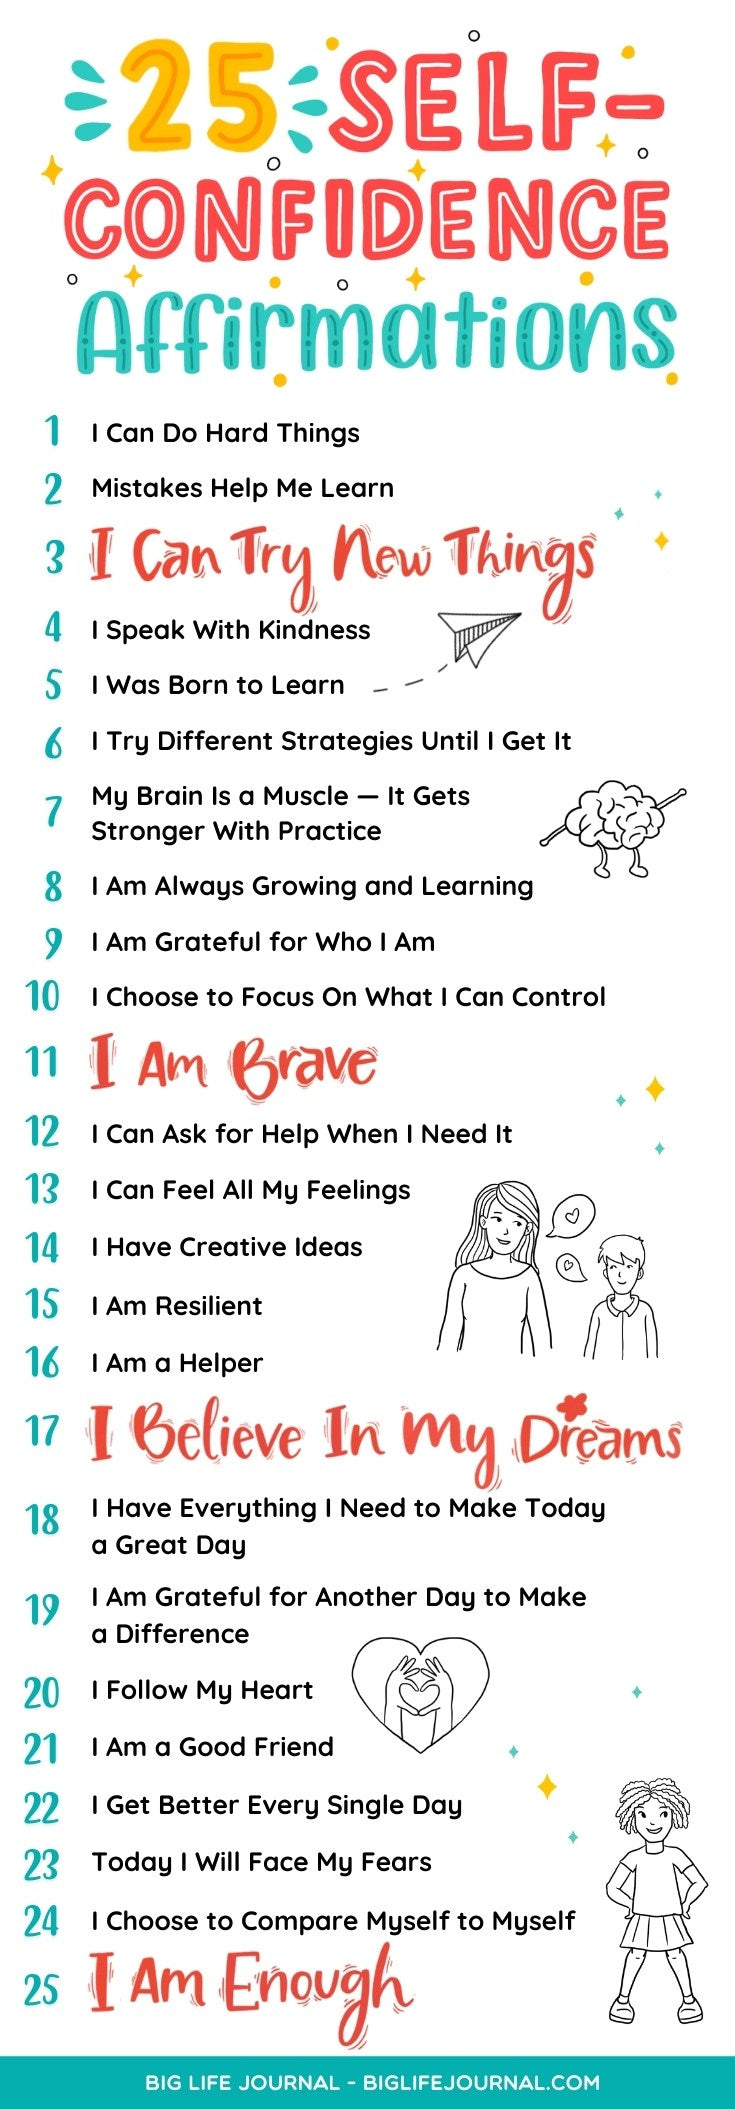 25 Self-Confidence Affirmations